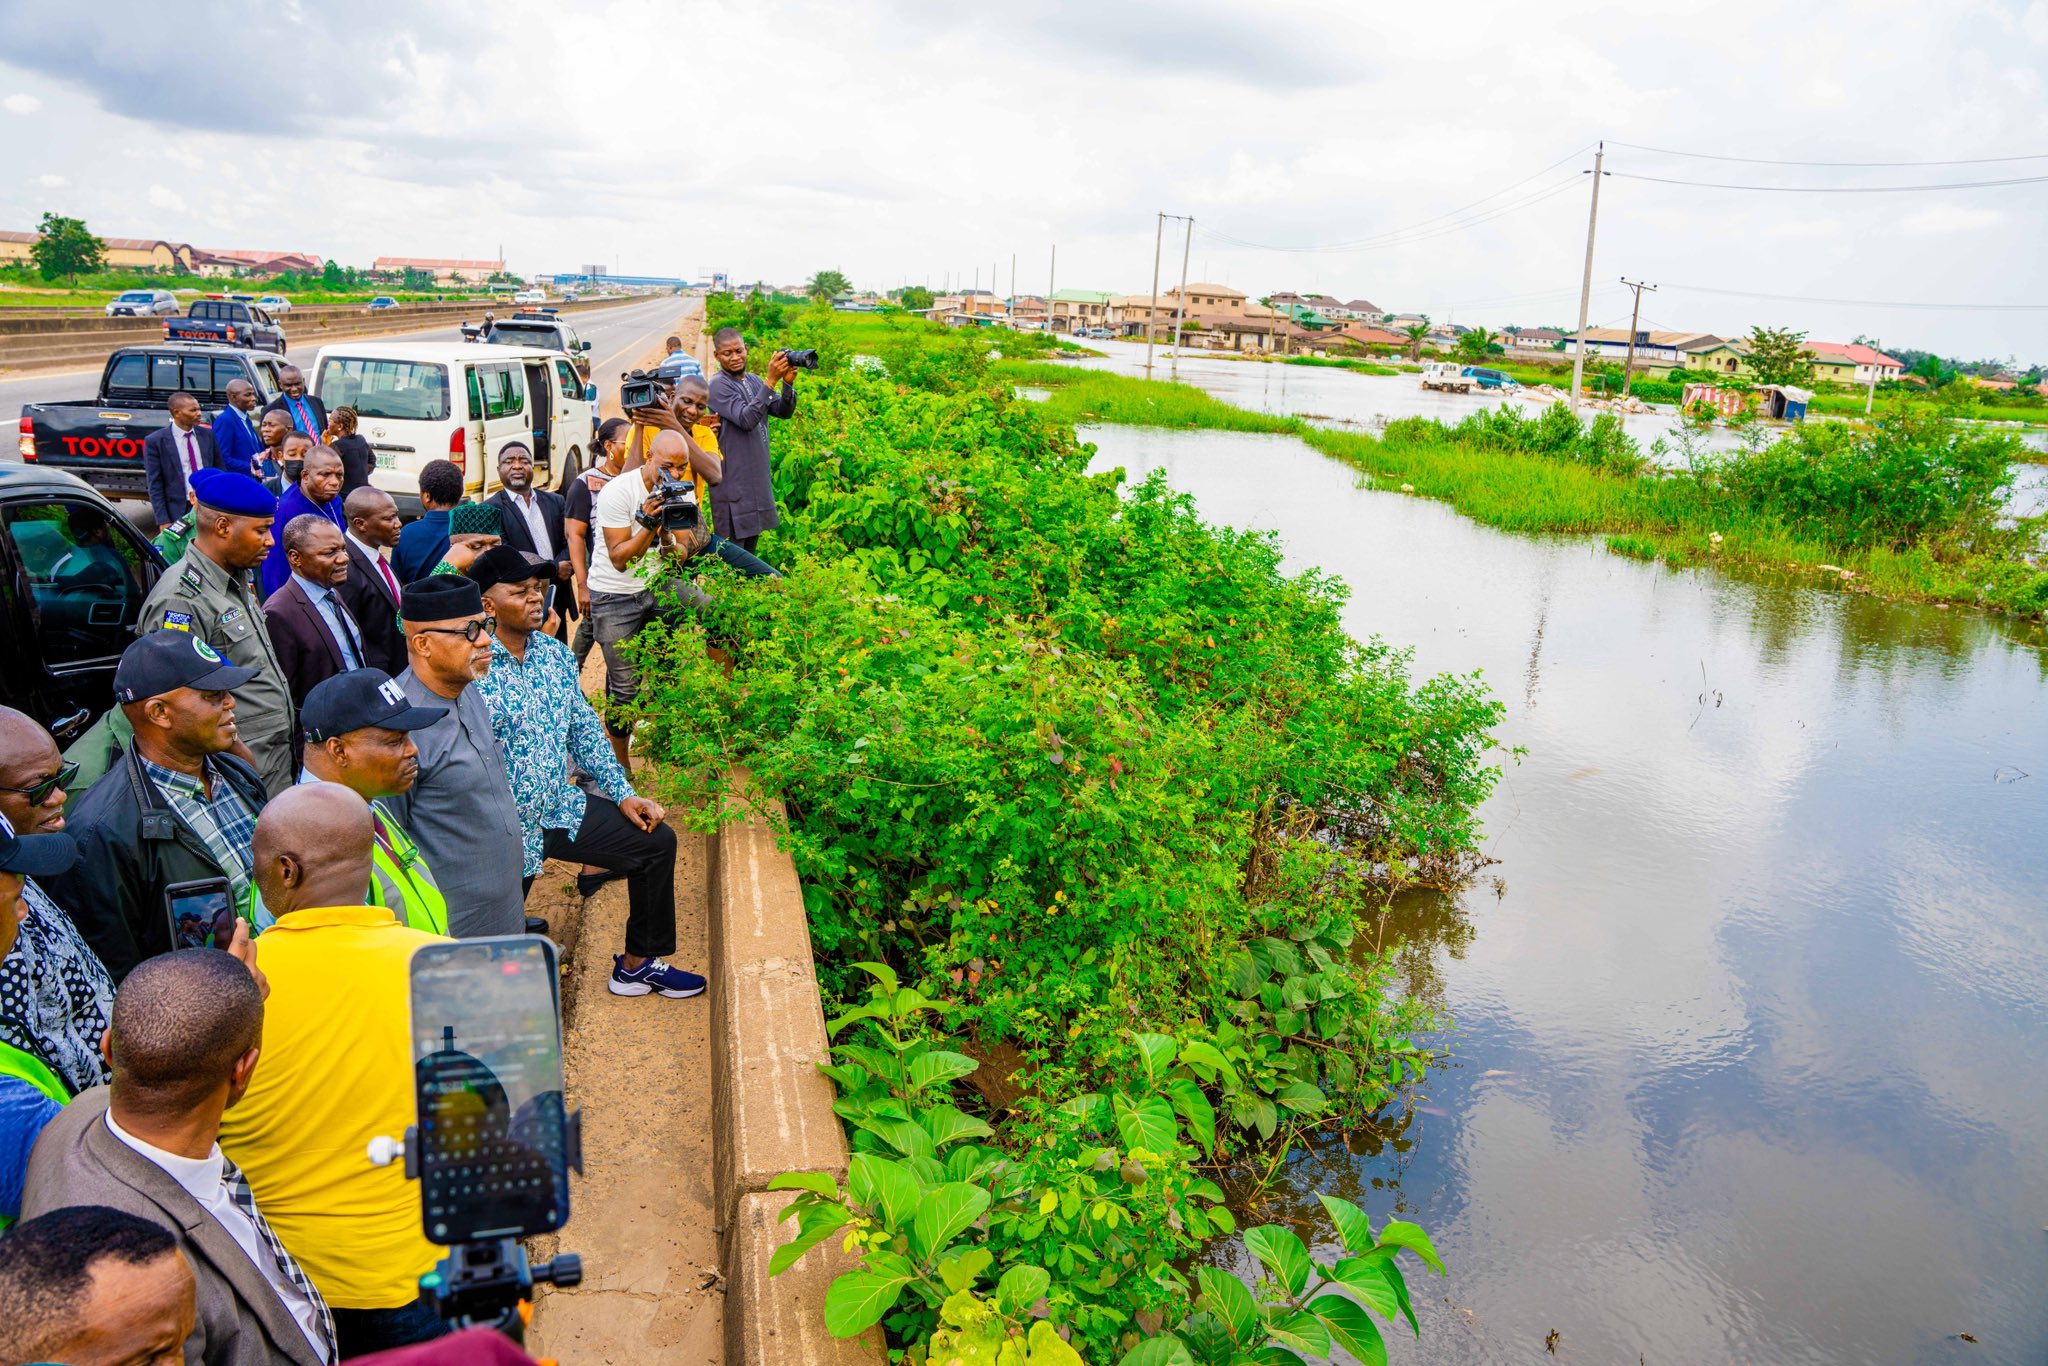 PHOTONEWS: Gov. Abiodun, Ministers Inspect Flooded Areas In Ogun